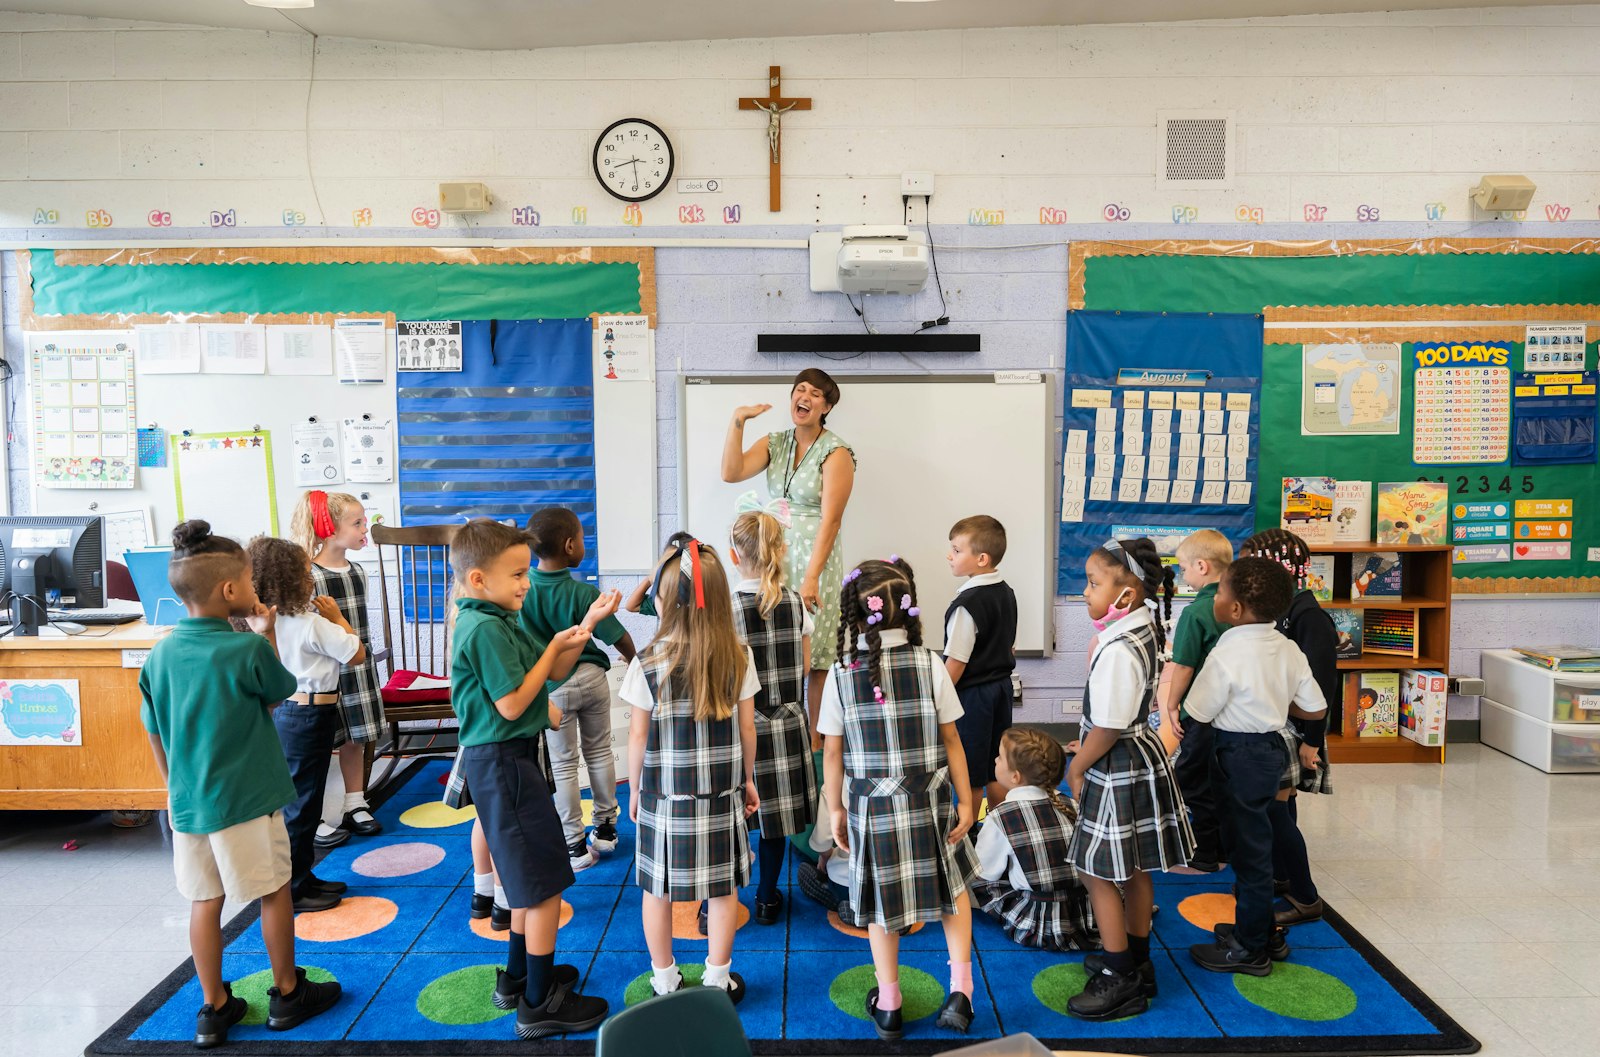 Students at St. Valentine School in Redford participate in a class activity on the first day of school Aug. 29. (Valaurian Waller | Detroit Catholic)